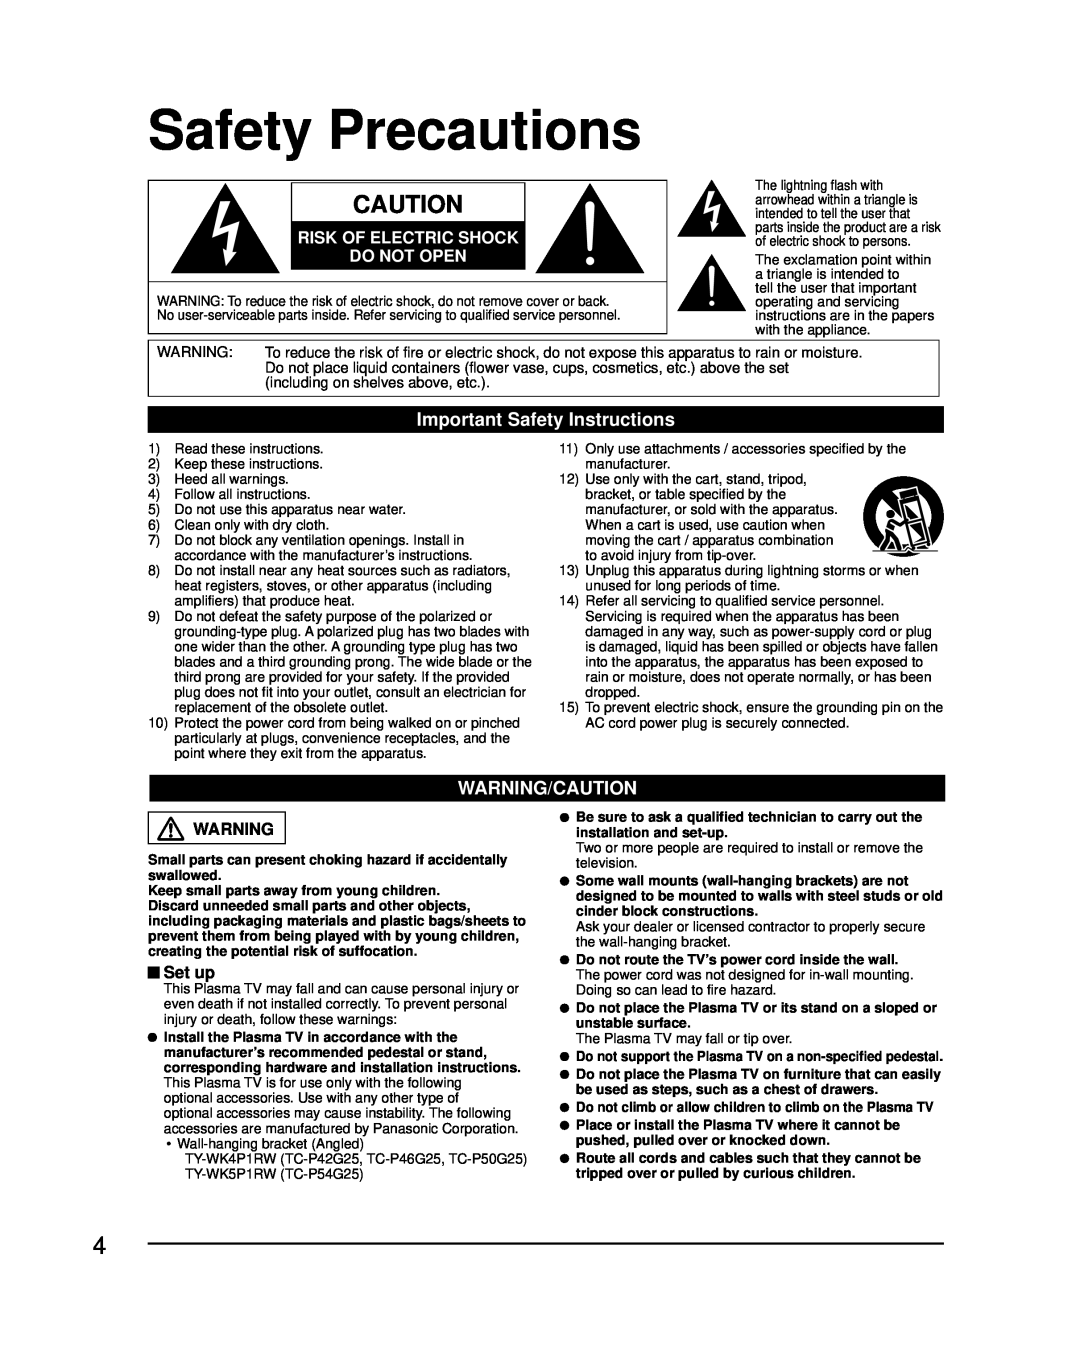 Panasonic TC-P42G25 Safety Precautions, Important Safety Instructions, Warning/Caution, Risk Of Electric Shock Do Not Open 